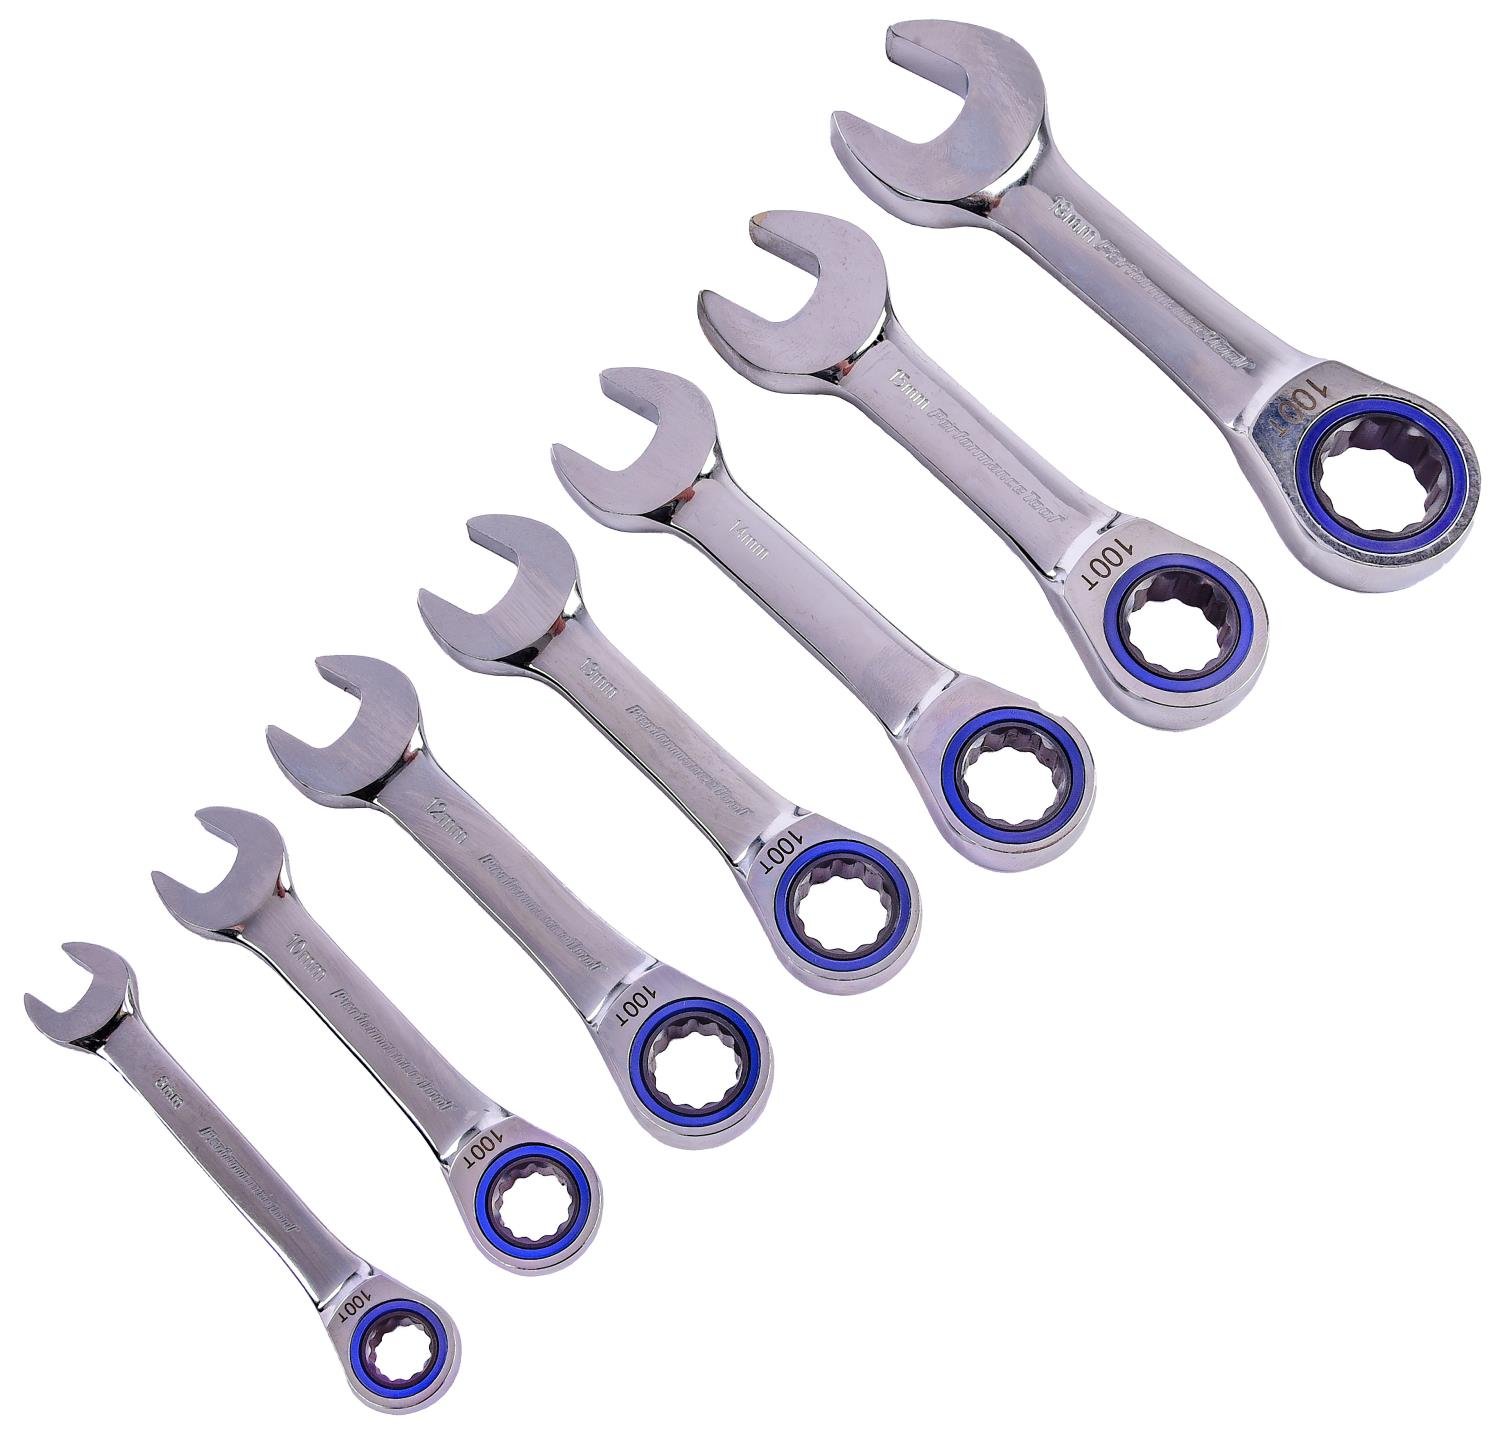 JEGS W30635: Ratchet Wrench Set Metric Gears: 100 Tooth 3.6 Degree  Sweep Stubby with Low-Profile Heads Chrome Vanadium Steel Includes:  mm, 10 mm, 12 mm, 13 mm, 14 mm, 15 mm,  18 mm, Storage Rack JEGS